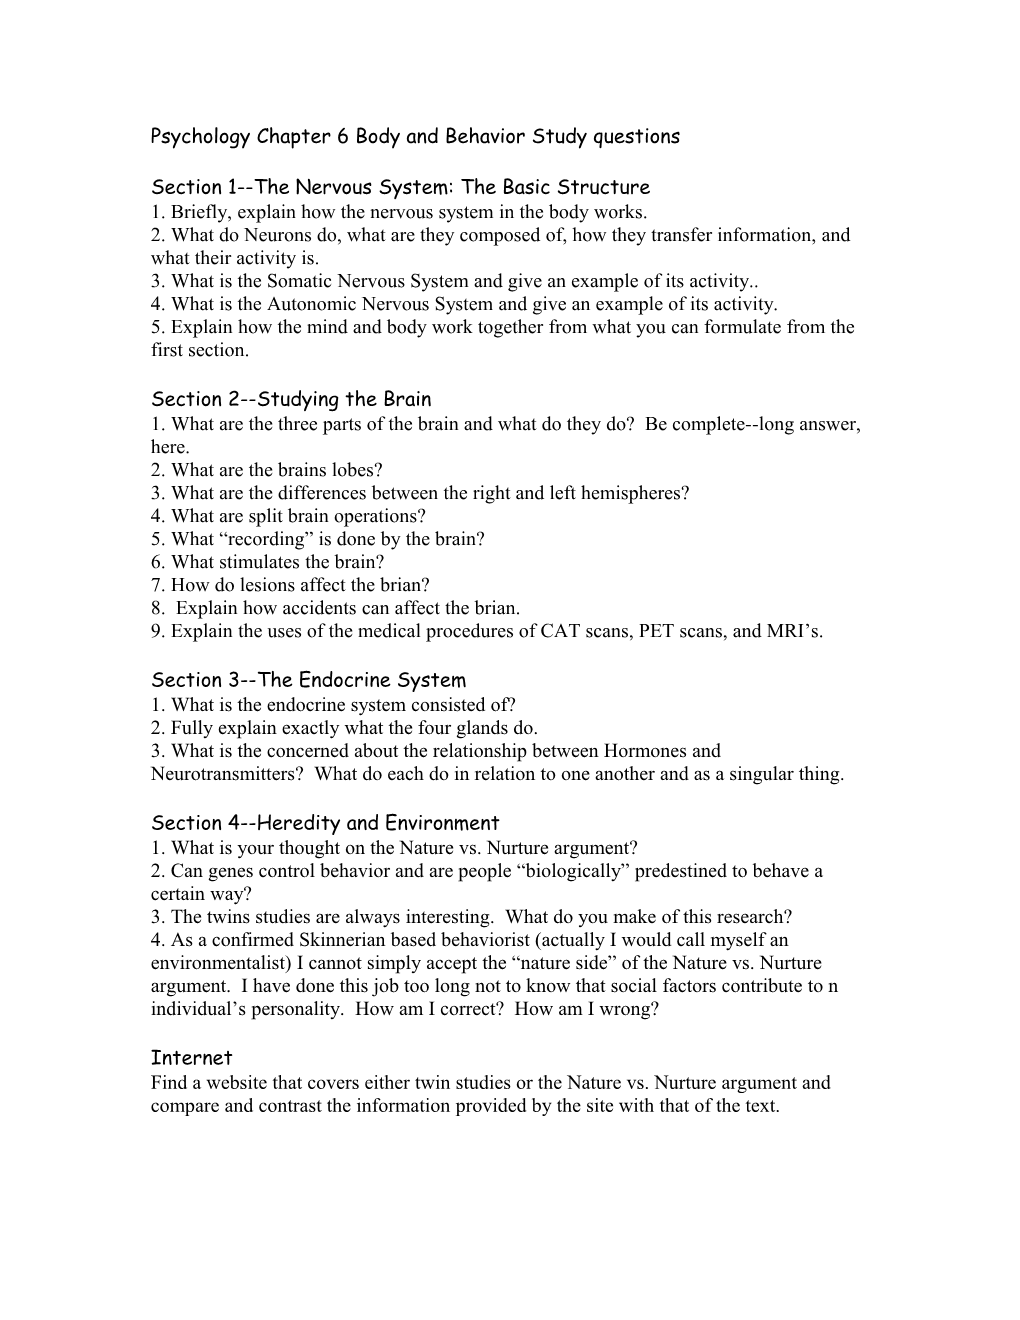 Psychology Chapter 6 Body and Behavior Study Questions